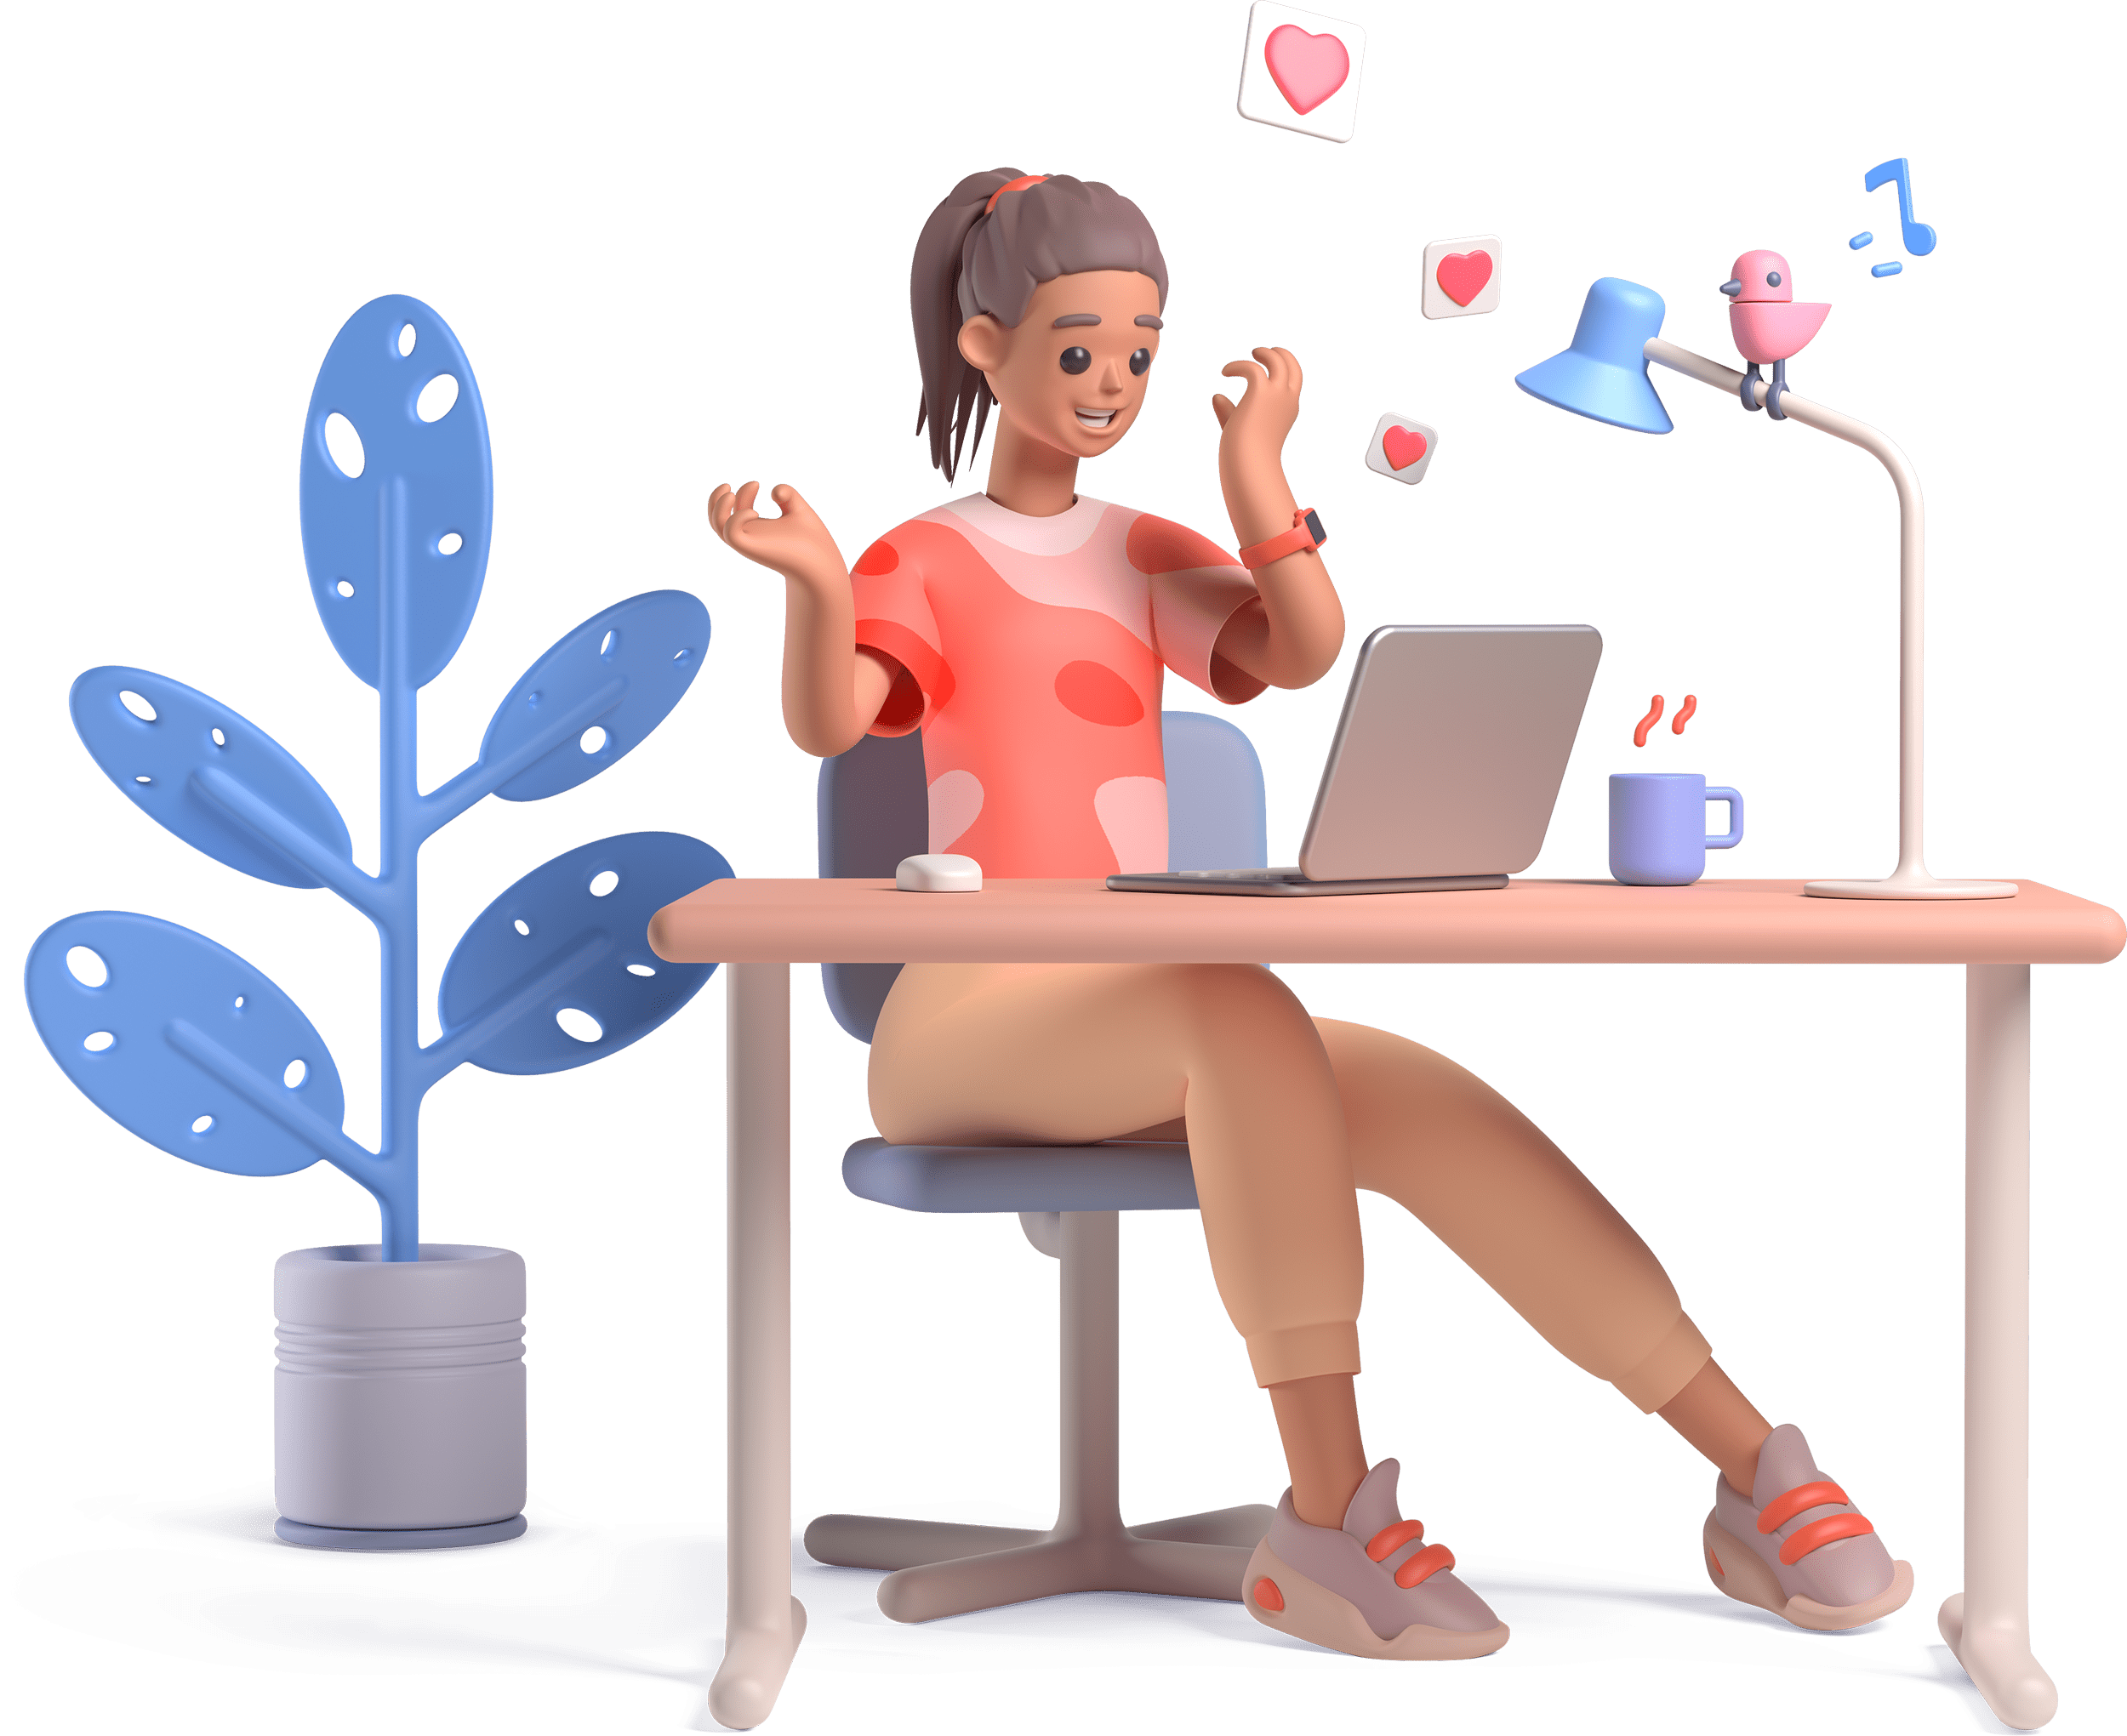 3D style illustration of someone sat at their desk looking at their laptop (a happy image with floating hearts and a cute singing bird)